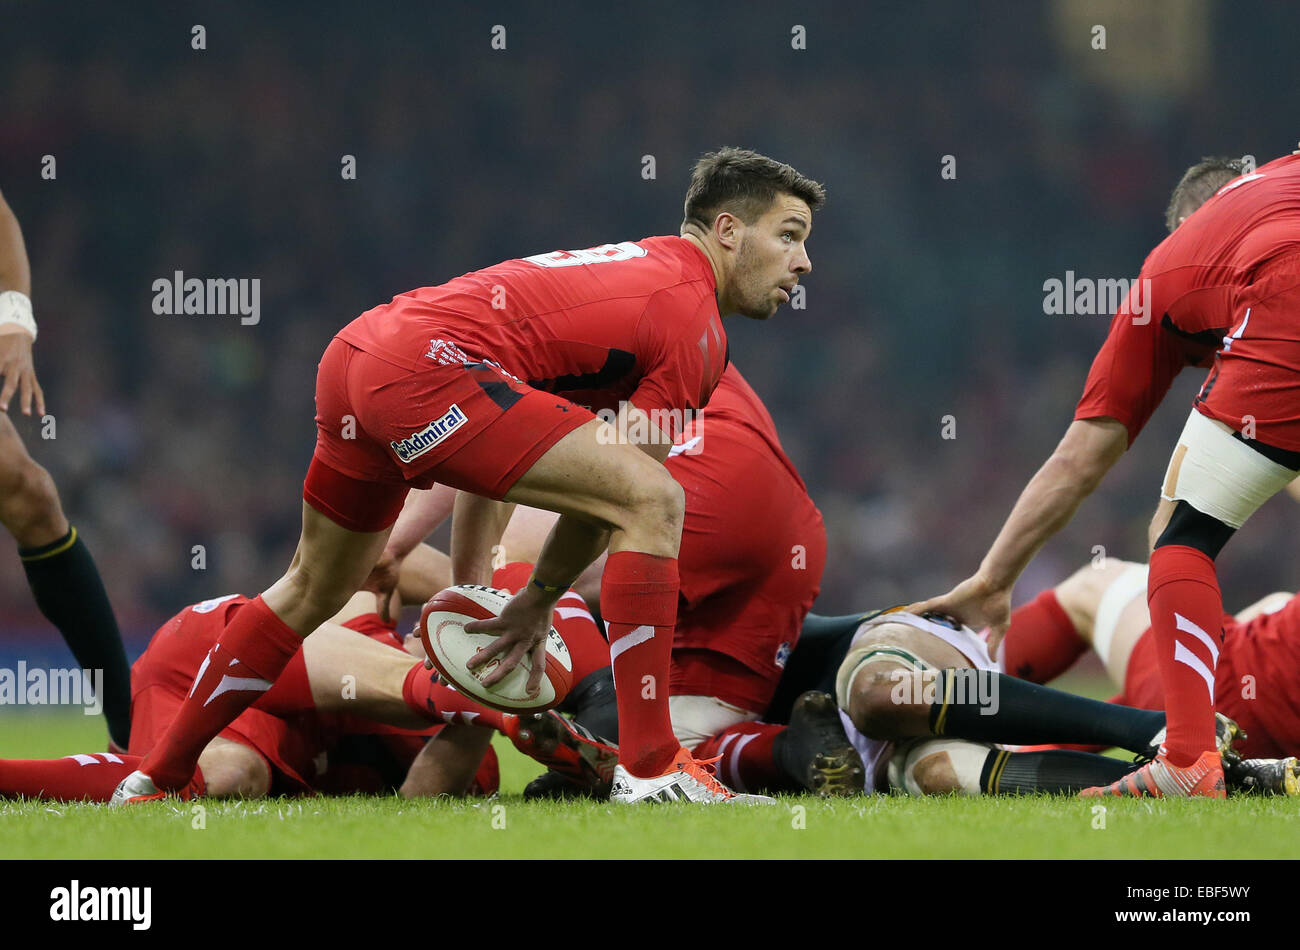 Cardiff, UK. 29th Nov, 2014. Rhys Webb of Wales - Autumn Internationals - Wales vs South Africa - Millennium Stadium - Cardiff - Wales - 29th November 2014 - Picture Simon Bellis/Sportimage. Credit:  csm/Alamy Live News Stock Photo